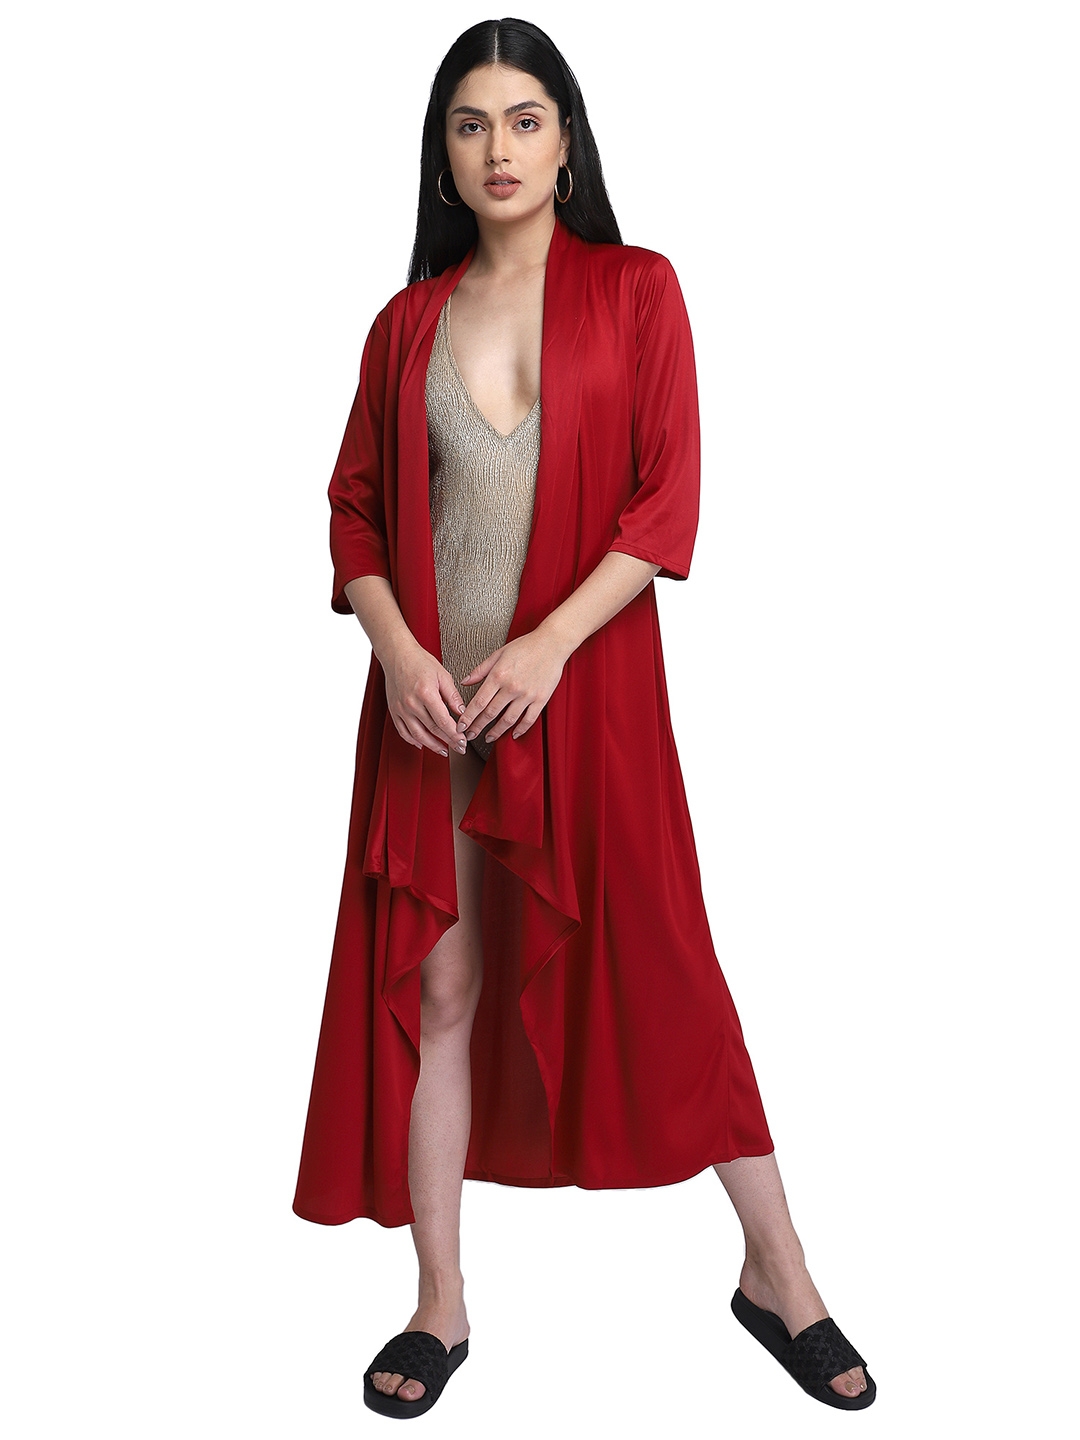 Smarty Pants | Smarty Pants women's solid maroon color cape cover up